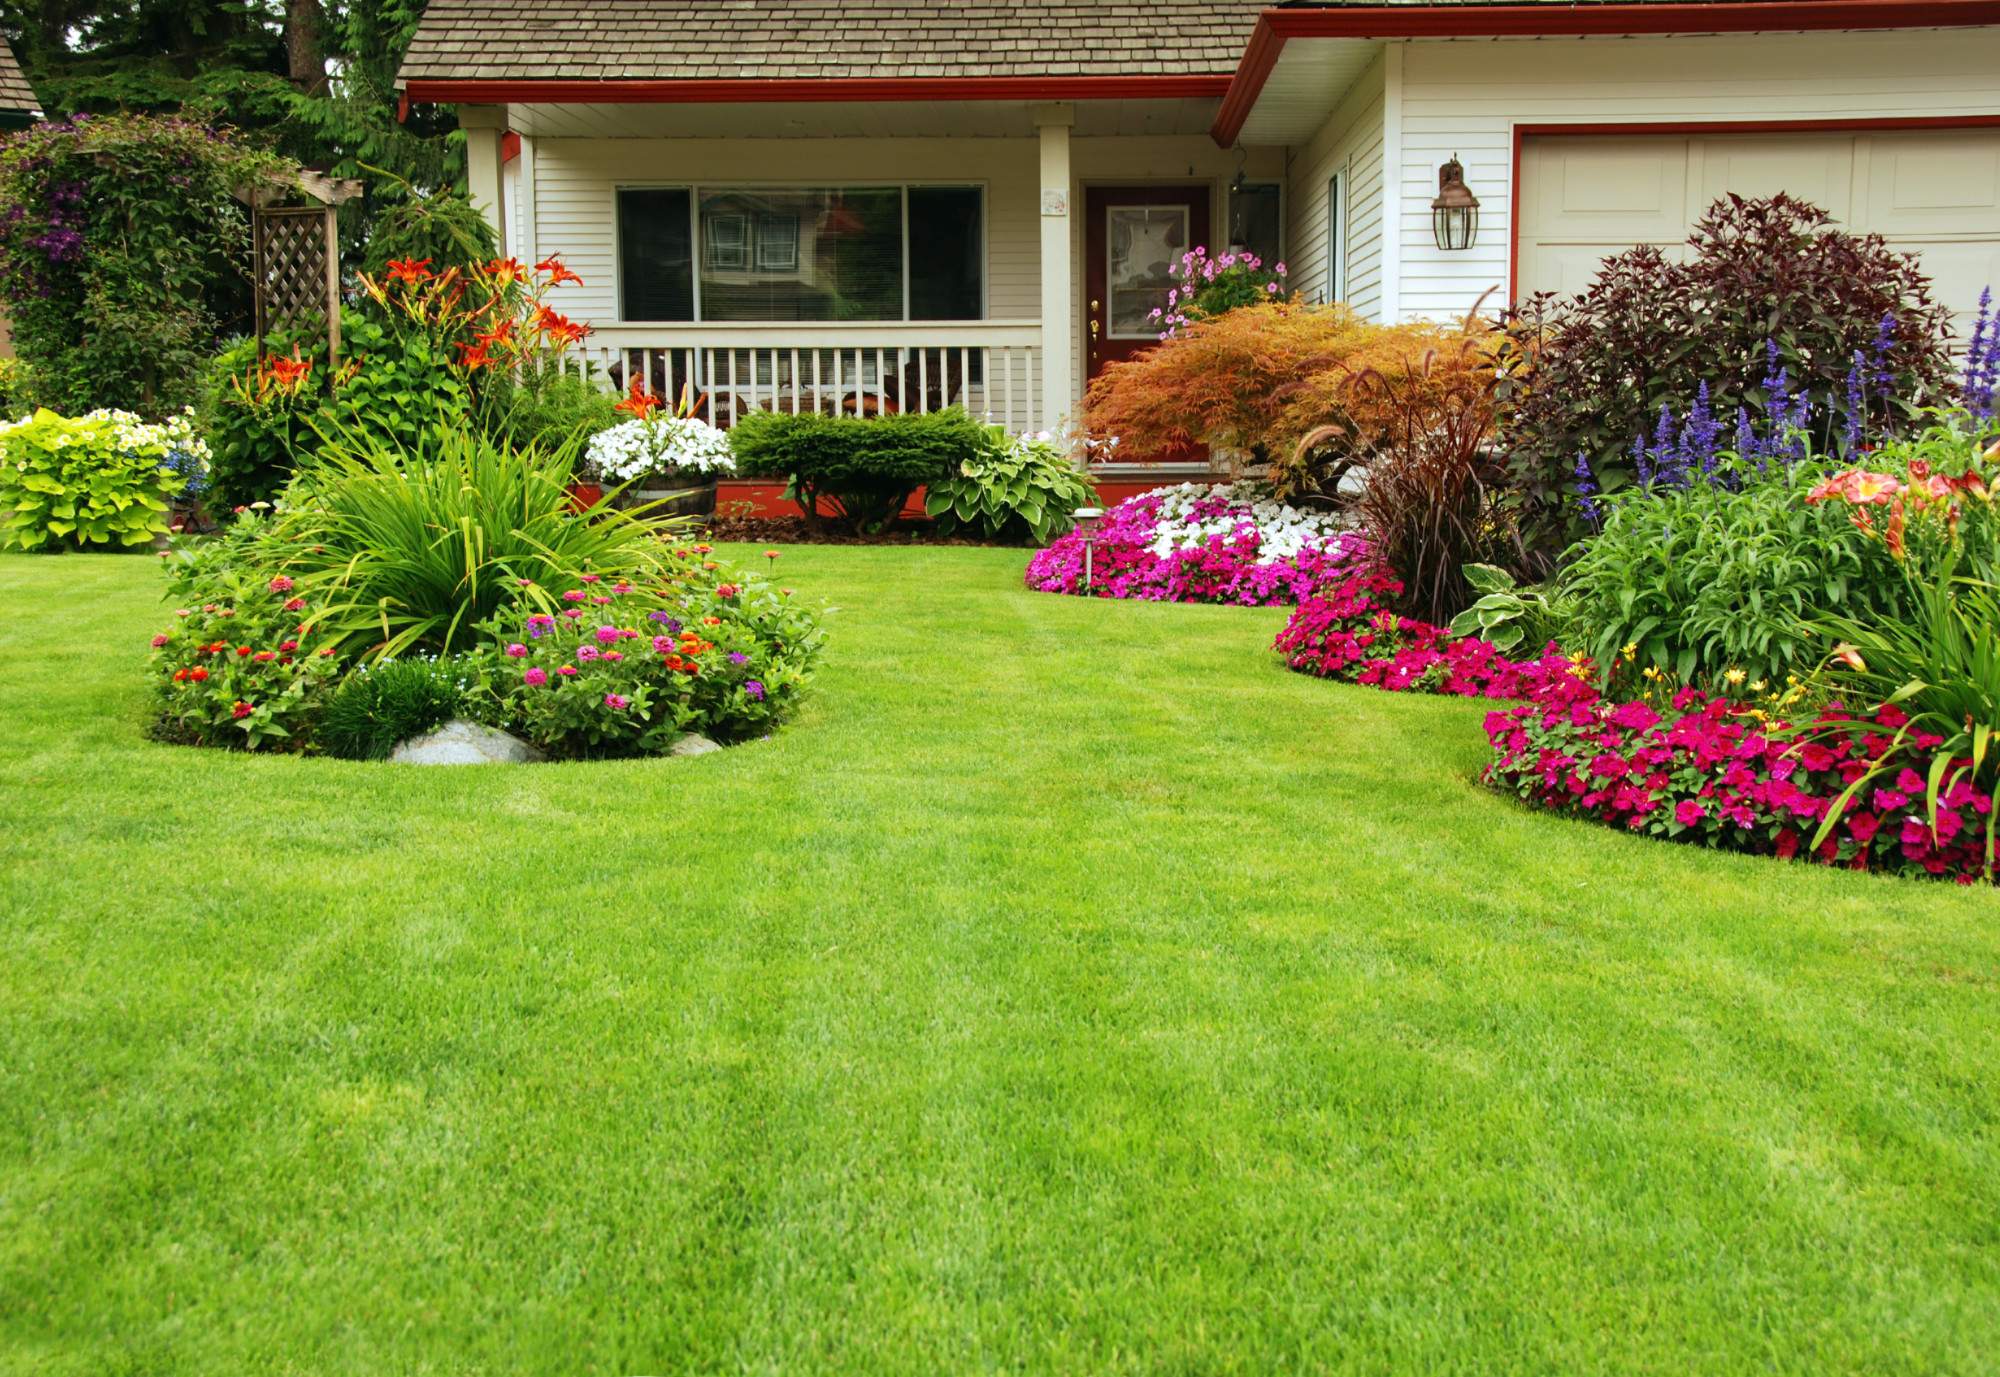 How to Select the Best Lawn Care Products for Your Garden